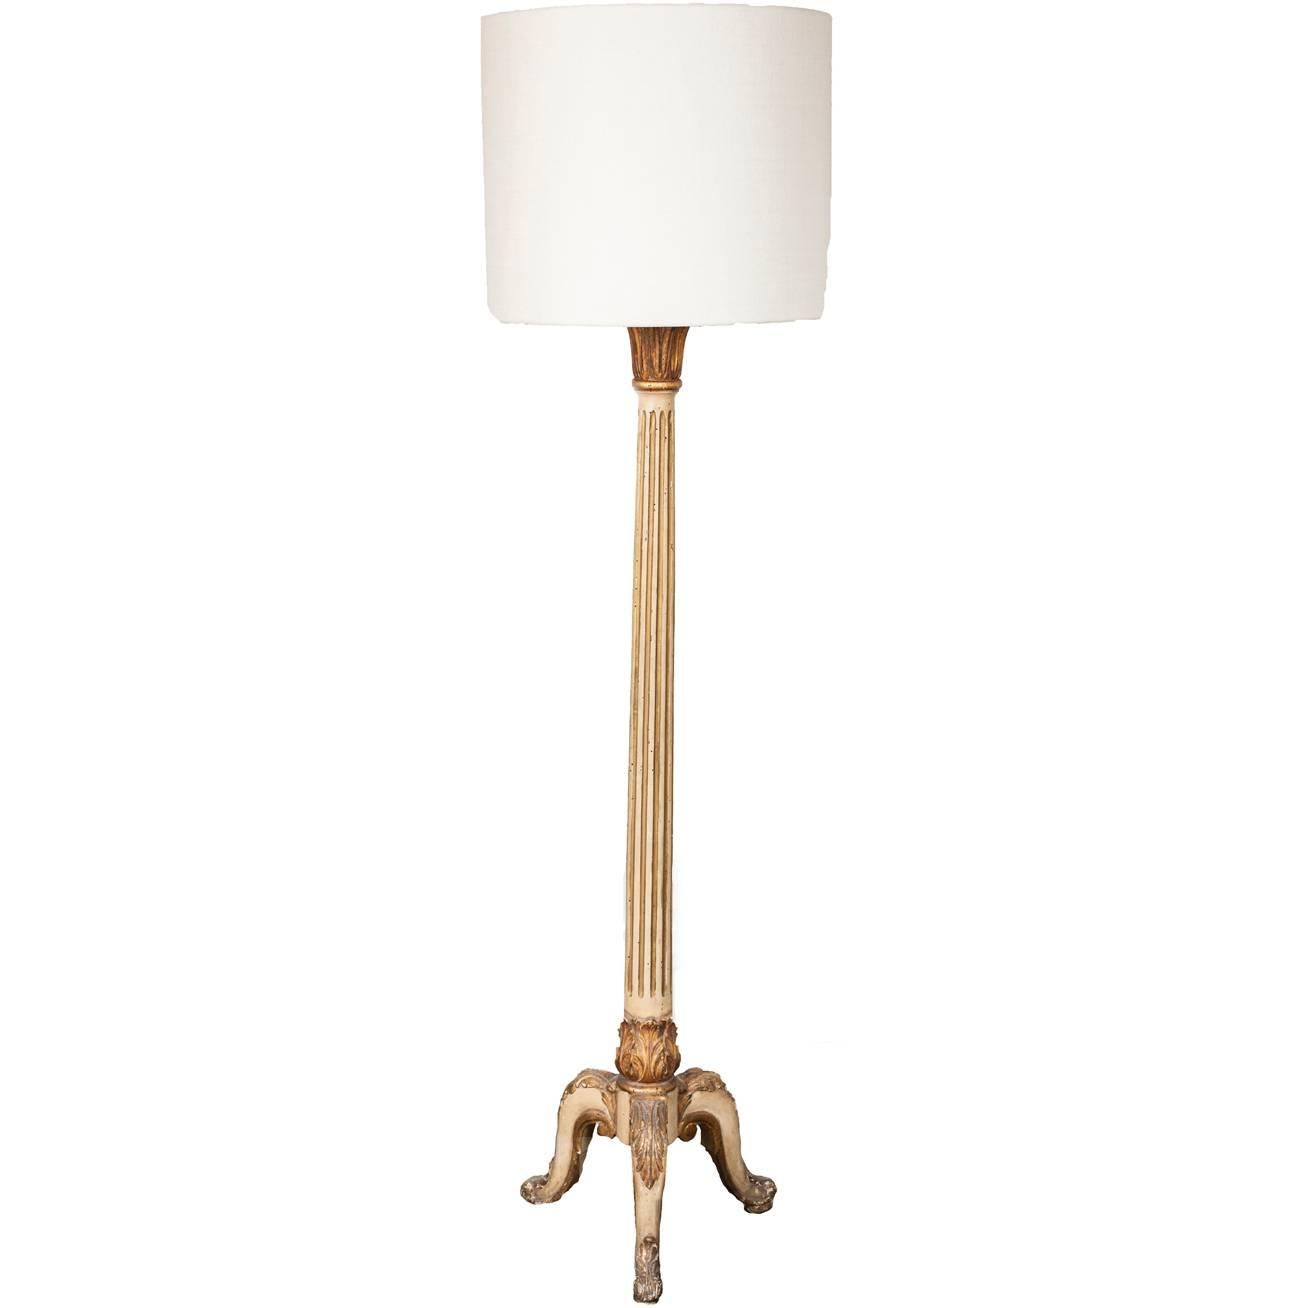 Highly Decorative 1960s Vintage Timber Floor Lamp For Sale